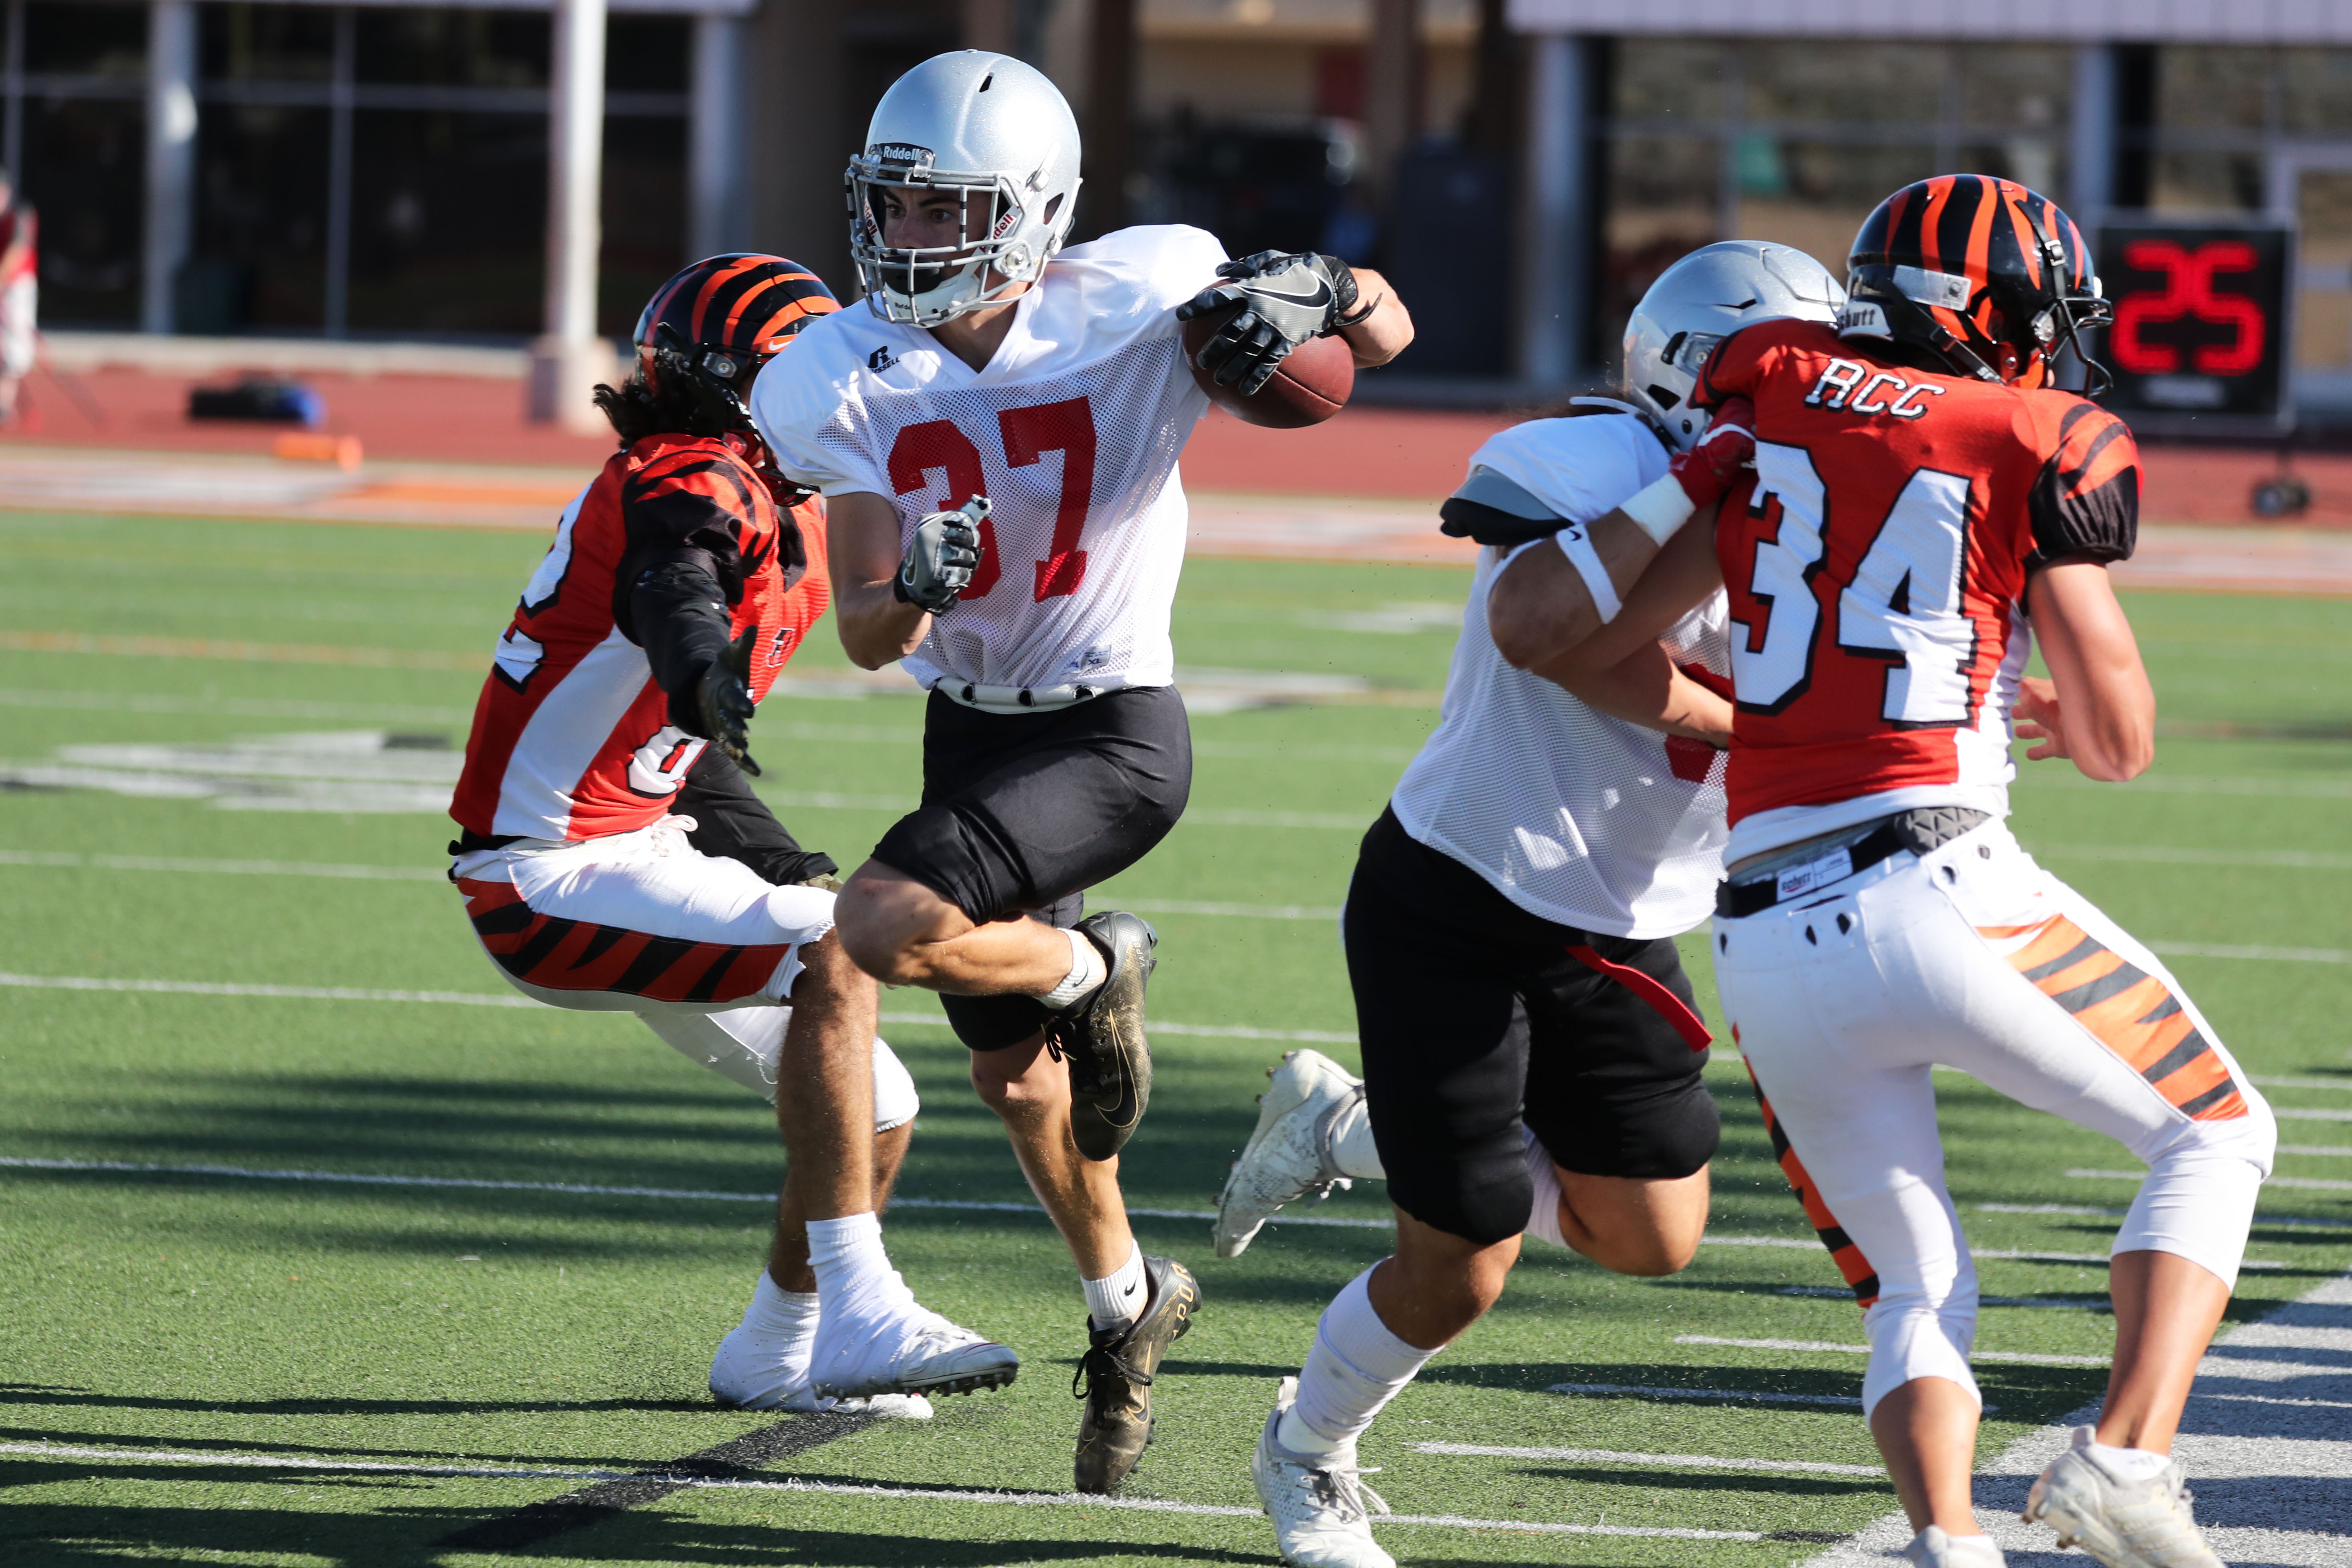 A Palomar football player (37) runs pass an opposing player, carrying a football in his left arm. A team player and an opposing player tackle each other on the right.